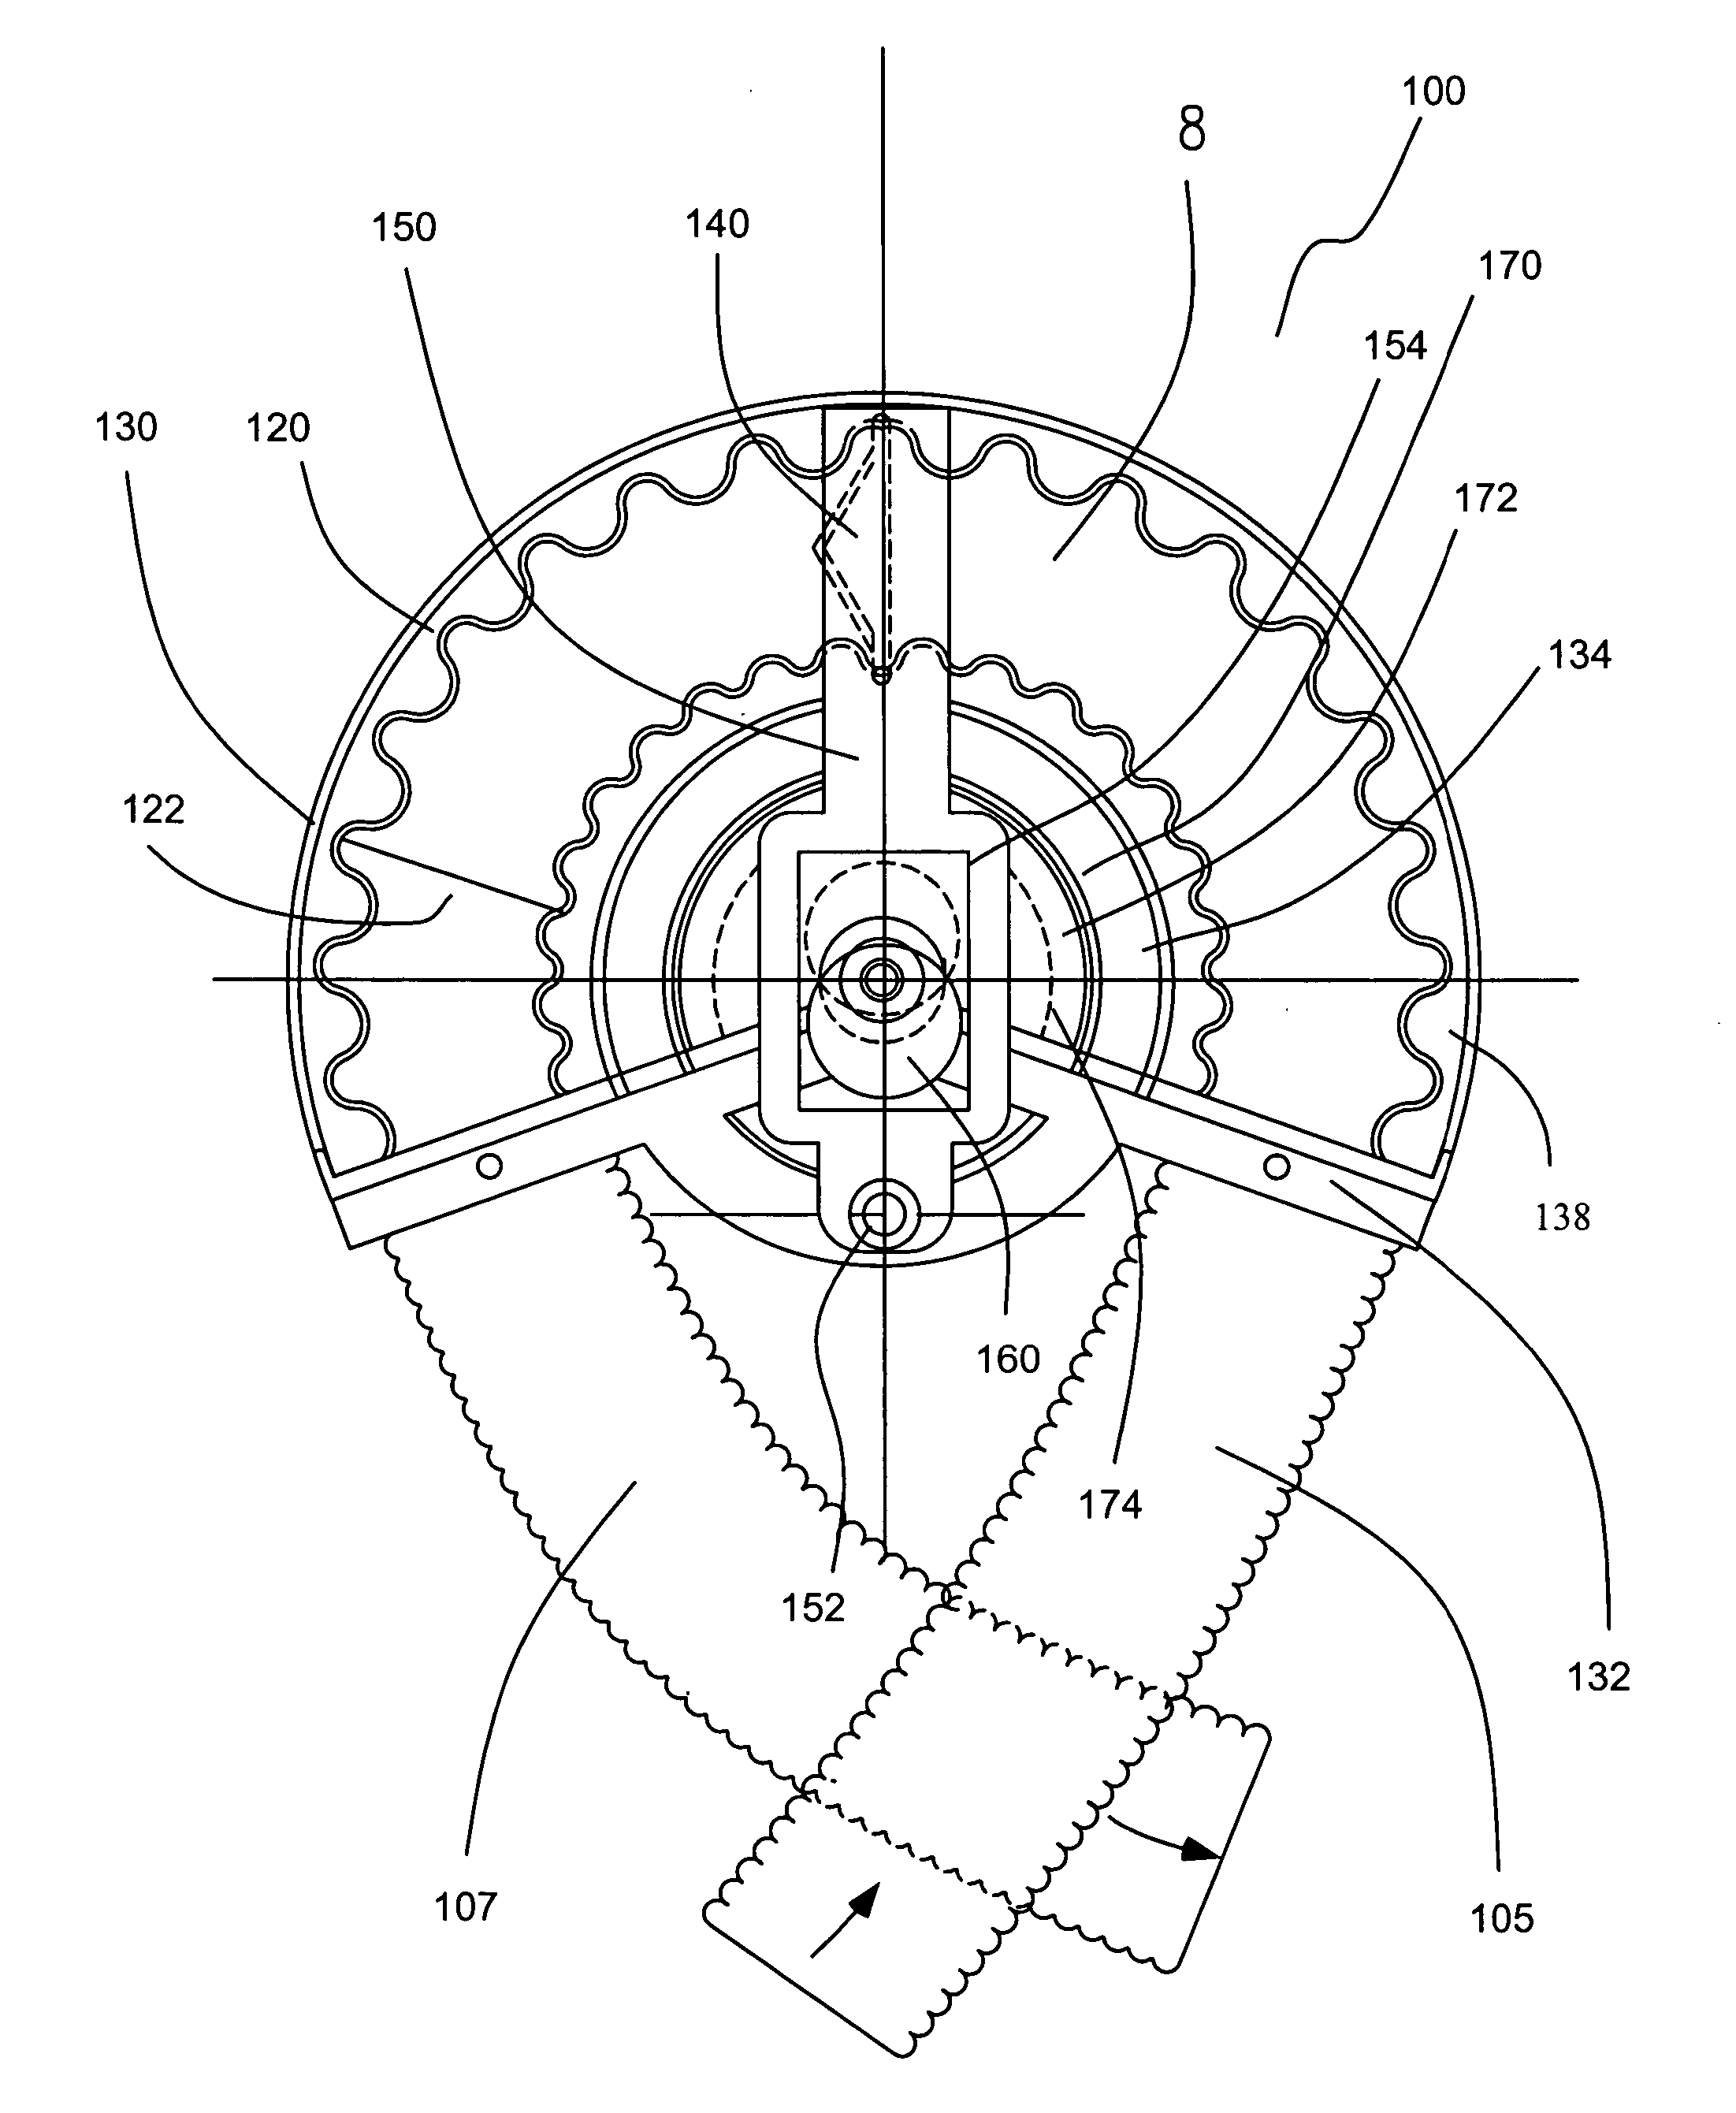 Devices, systems and methods for assisting blood flow